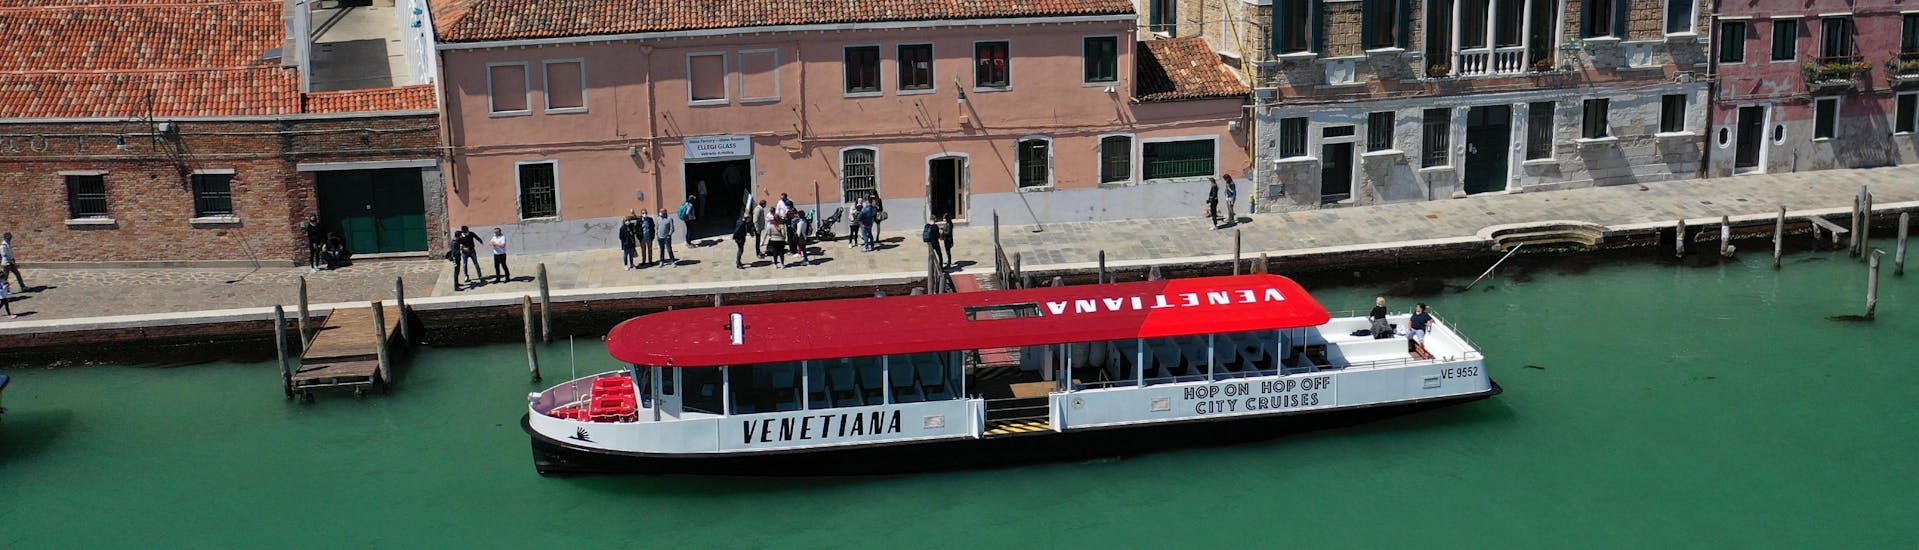  View over Venice with the boat of Venetiana Boat Tours on the canal.